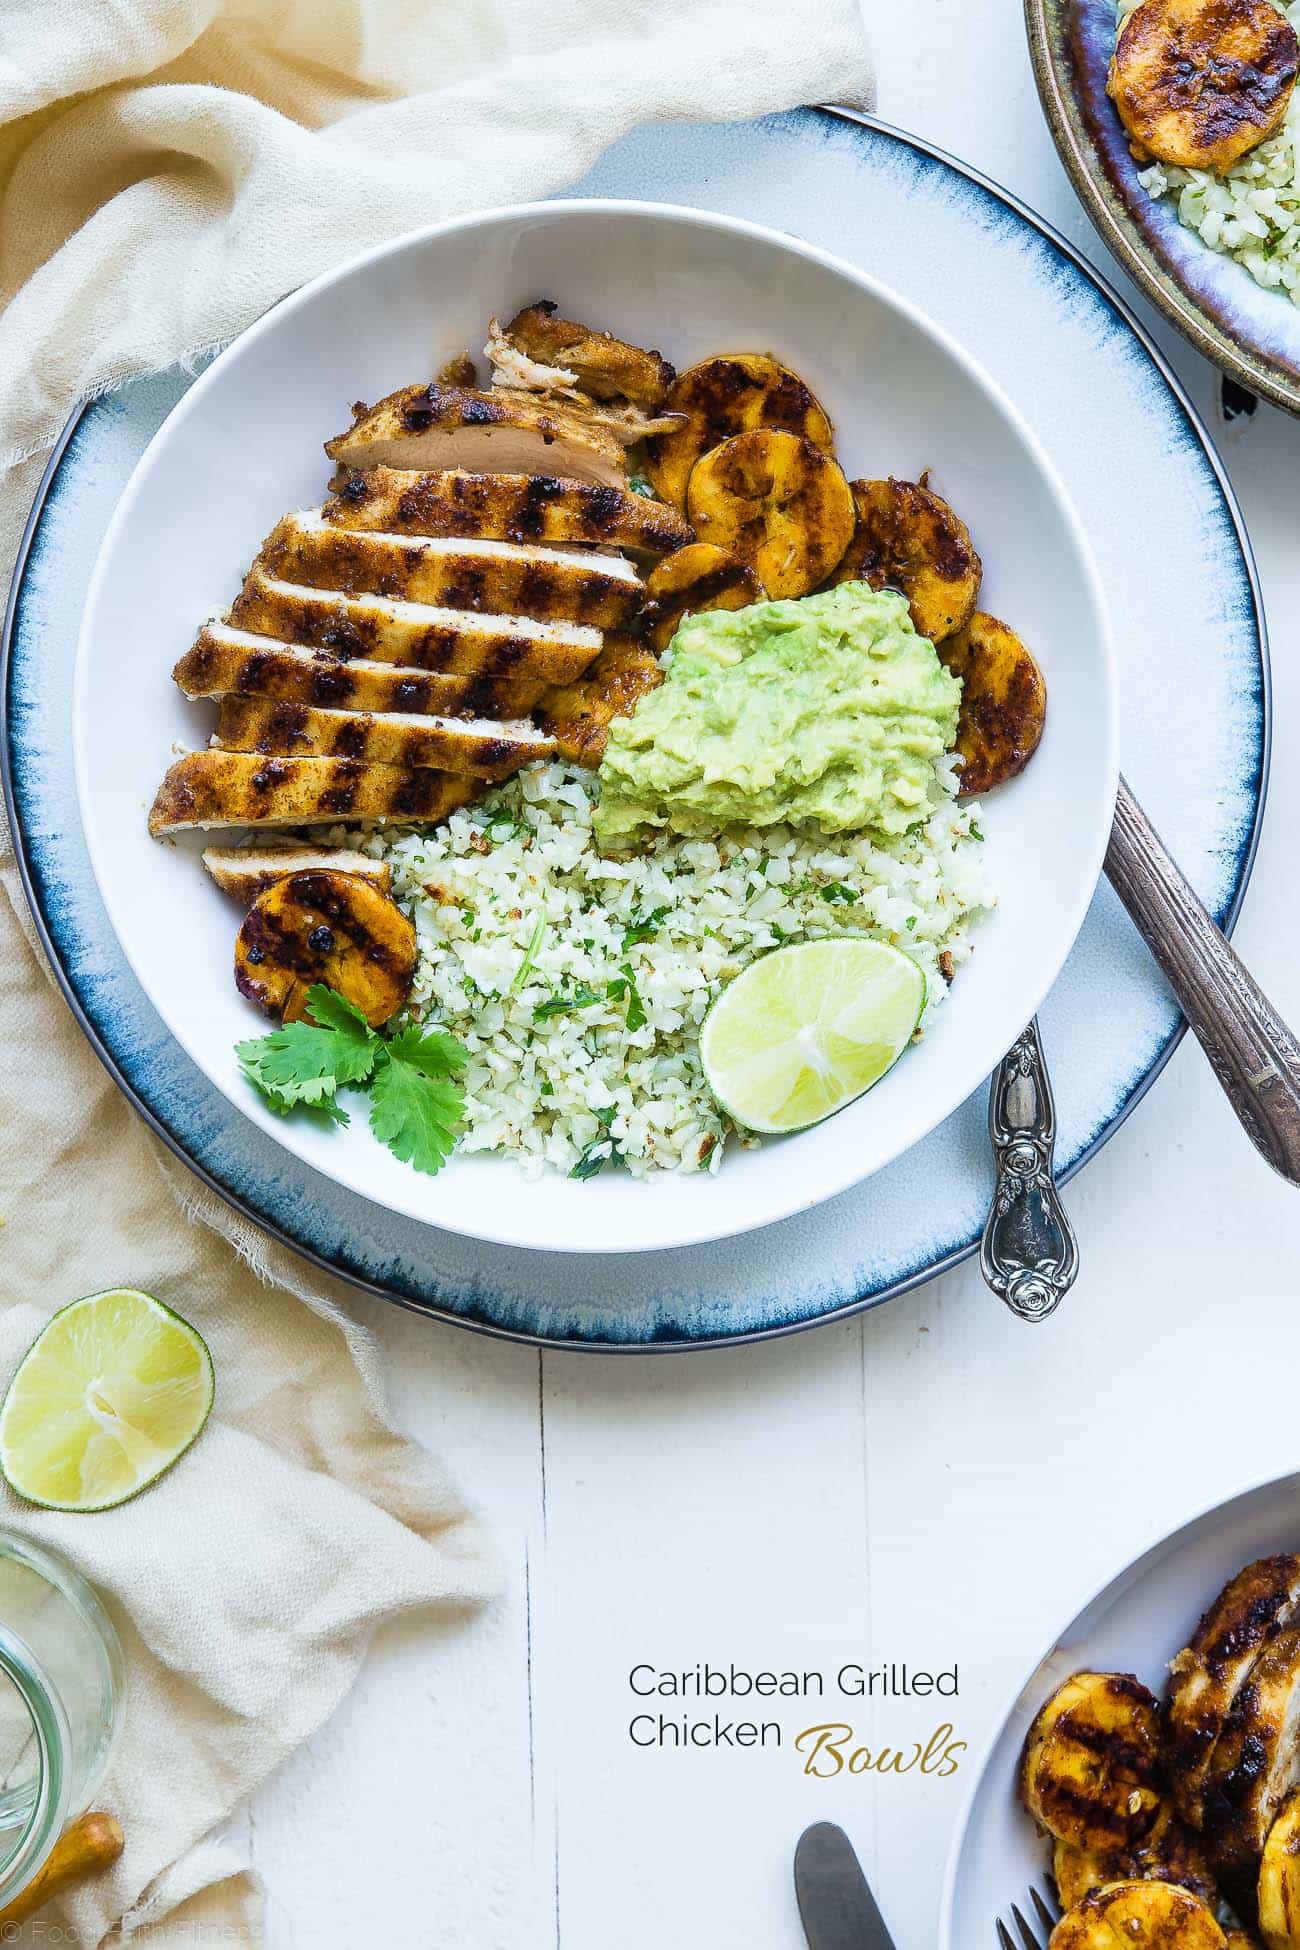 Caribbean Chicken Bowls - These paleo-friendly bowls have grilled plantains, cauliflower rice and avocado! A healthy, gluten free summer meal for under 500 calories! | #Foodfaithfitness | #Paleo #Glutenfree #Healthy #chickenrecipe